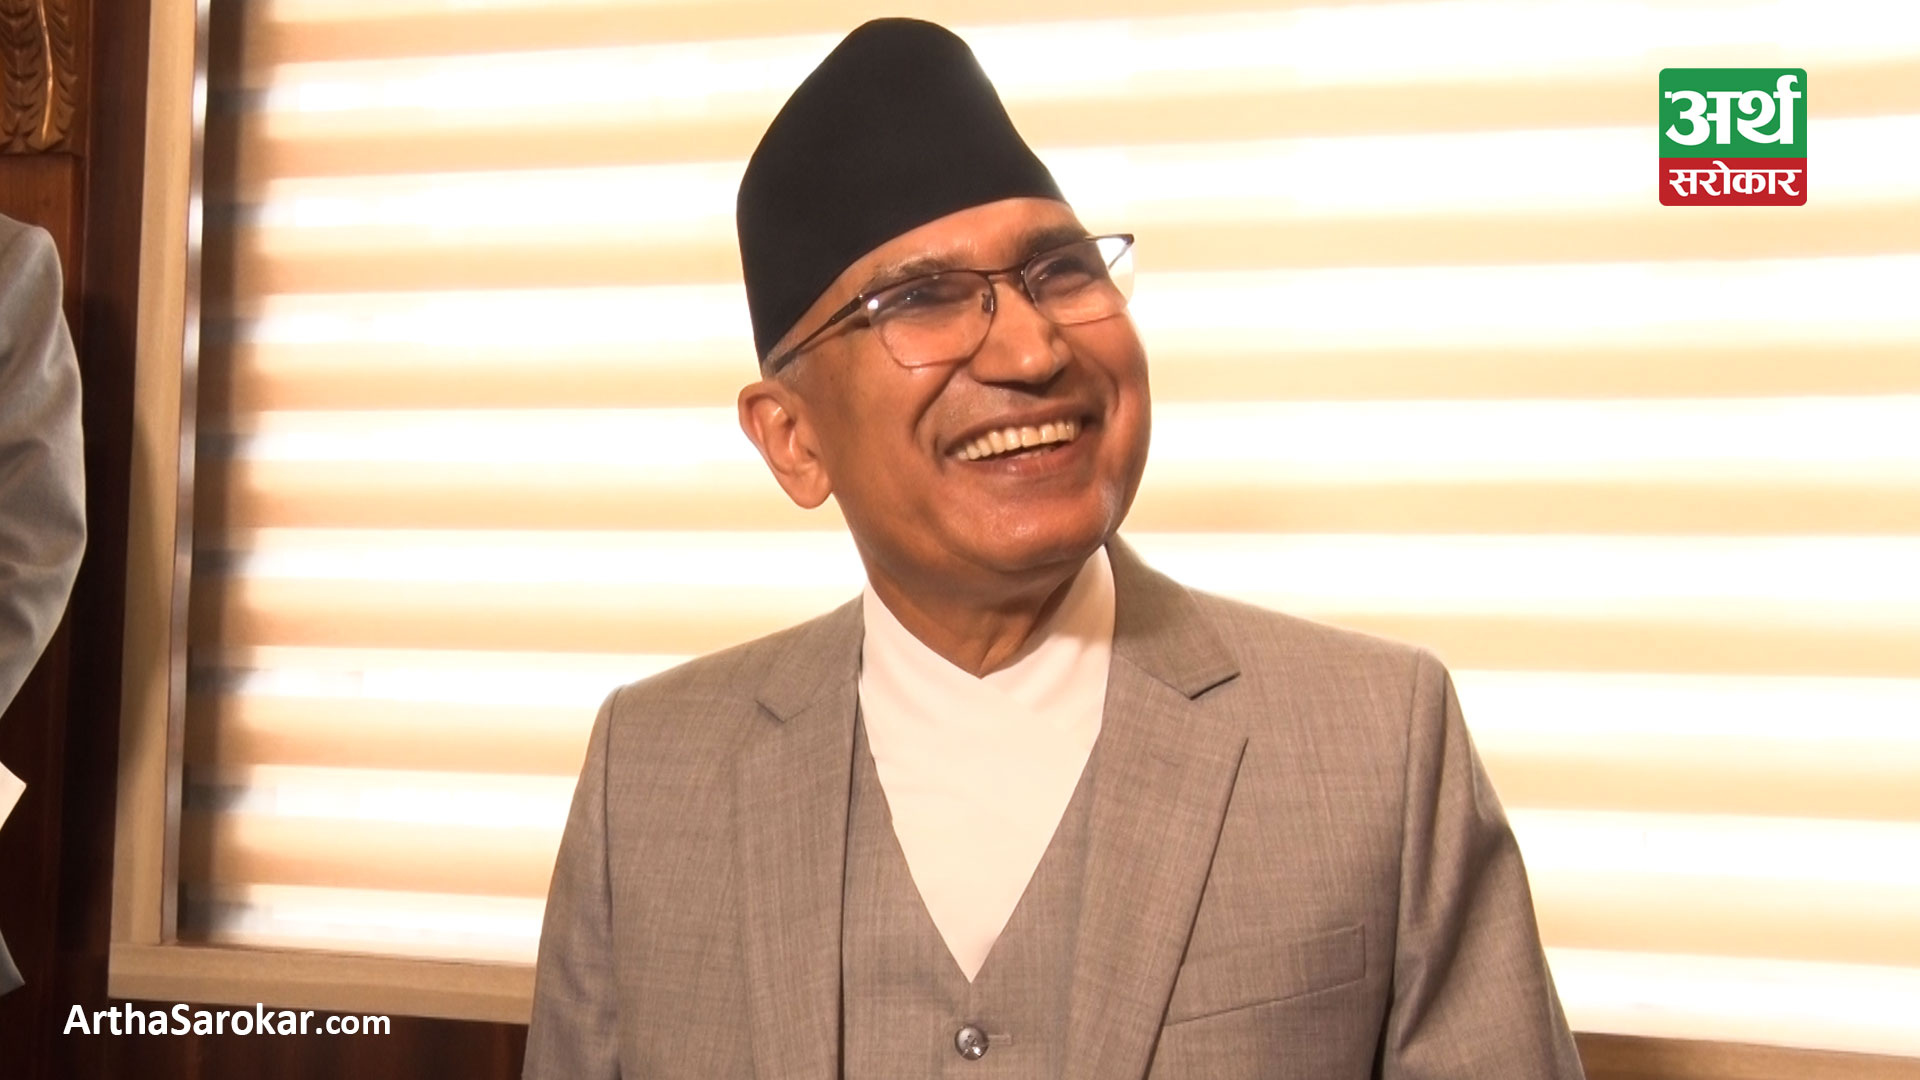 Budget not to be a hindrance to implementing the vision of the new government: Finance Minister Paudel